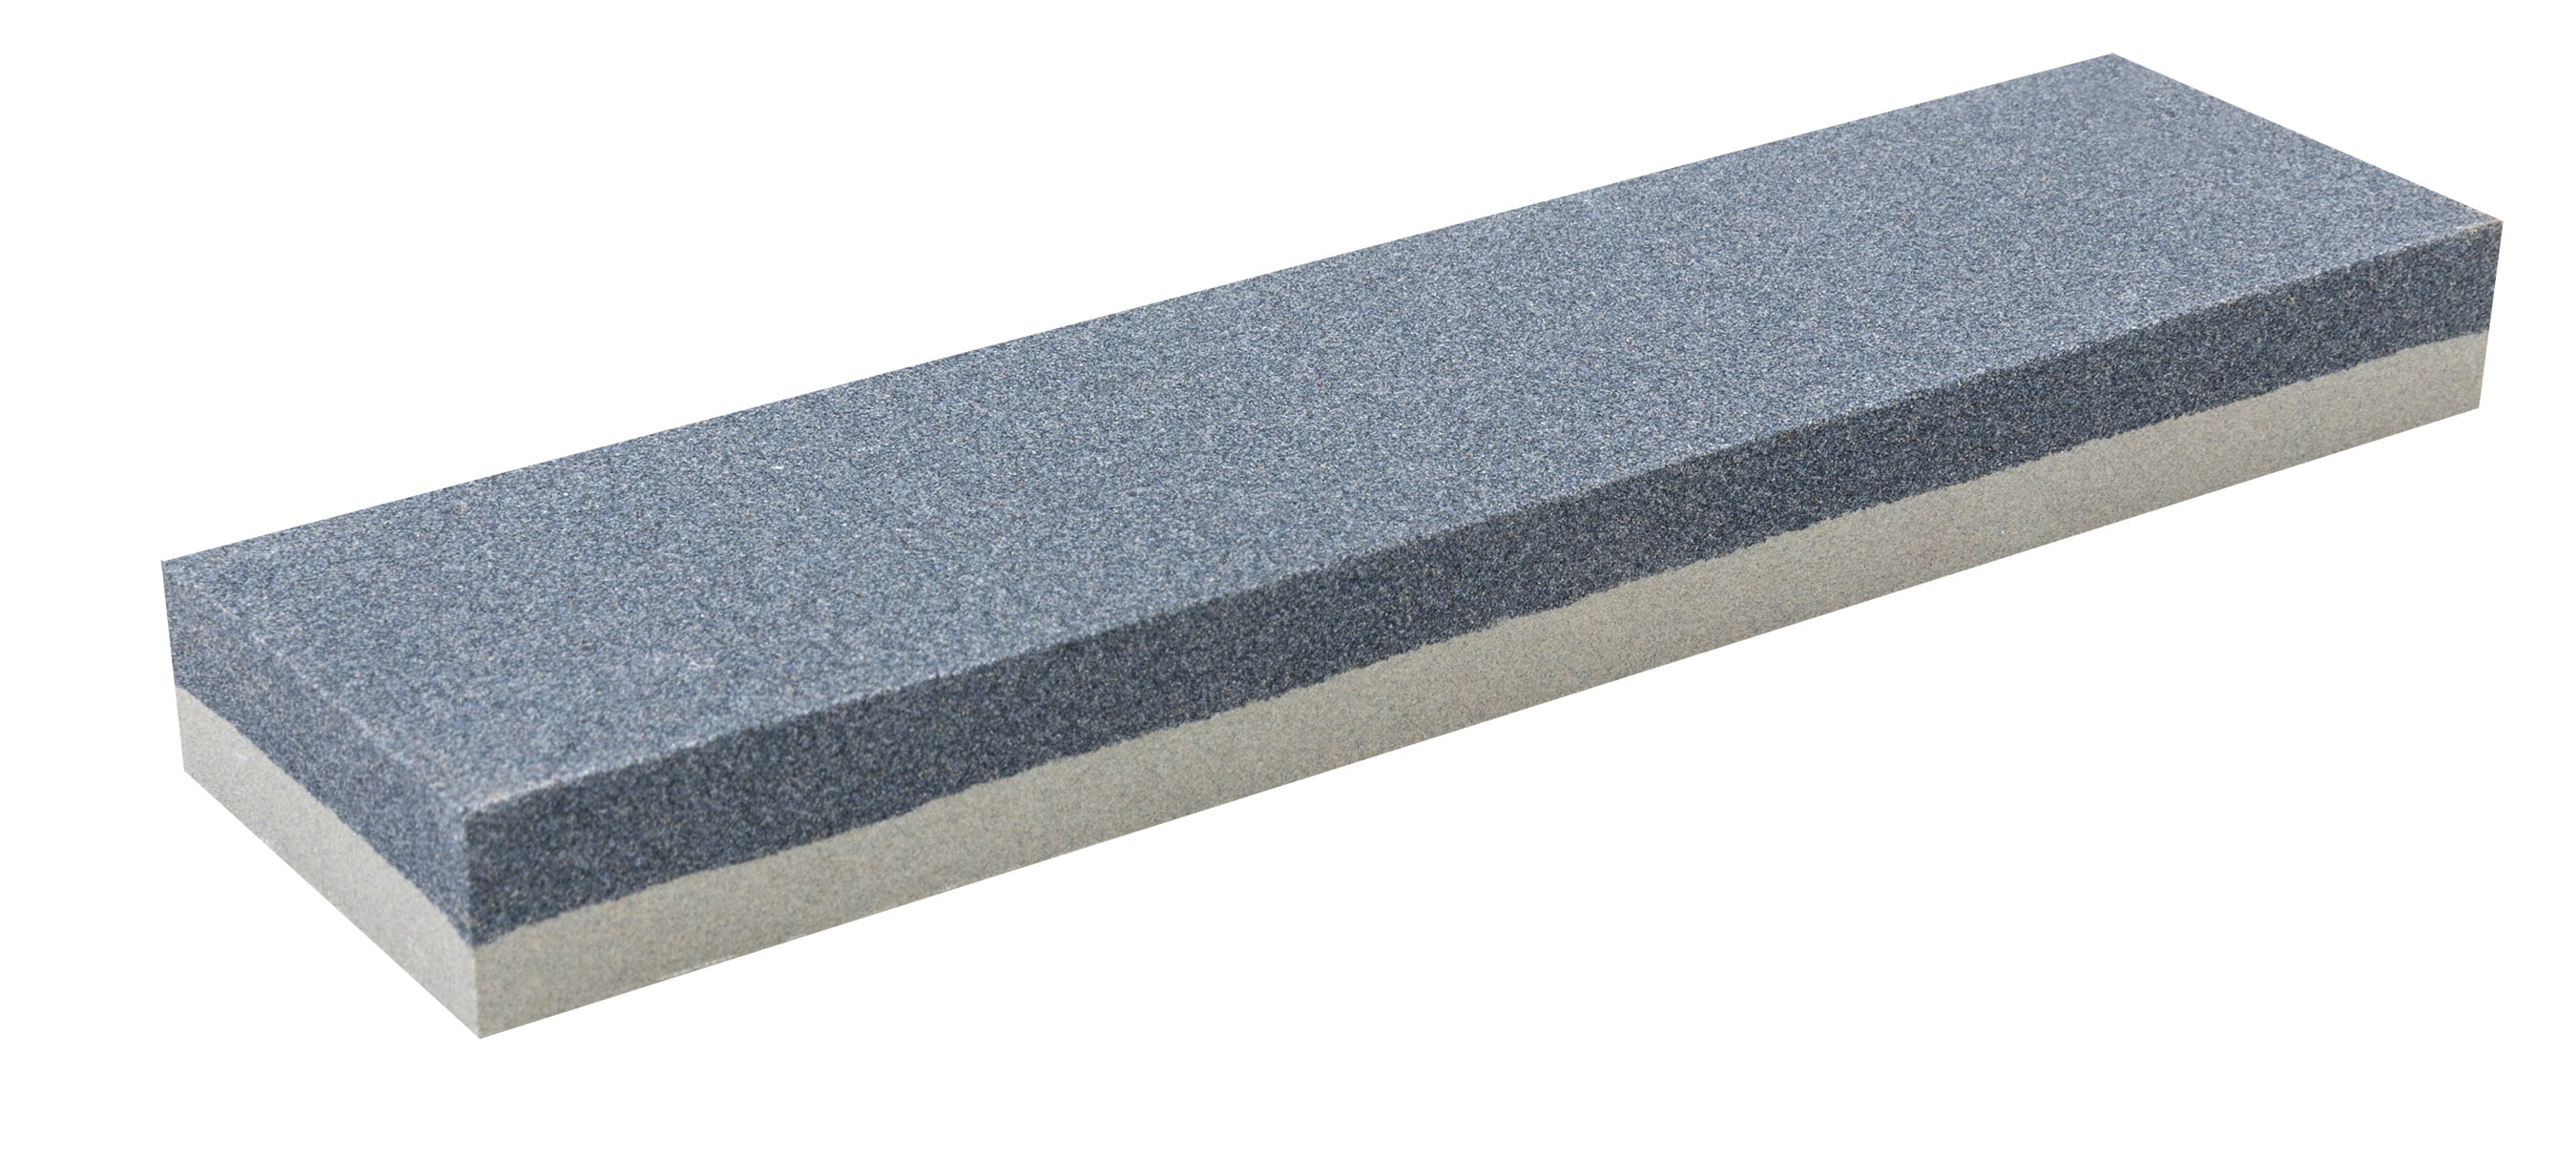 Details about   Sharpening Stone Sticks & Stones 92016/724 Silver Smith's Tapered Triangle Stone 